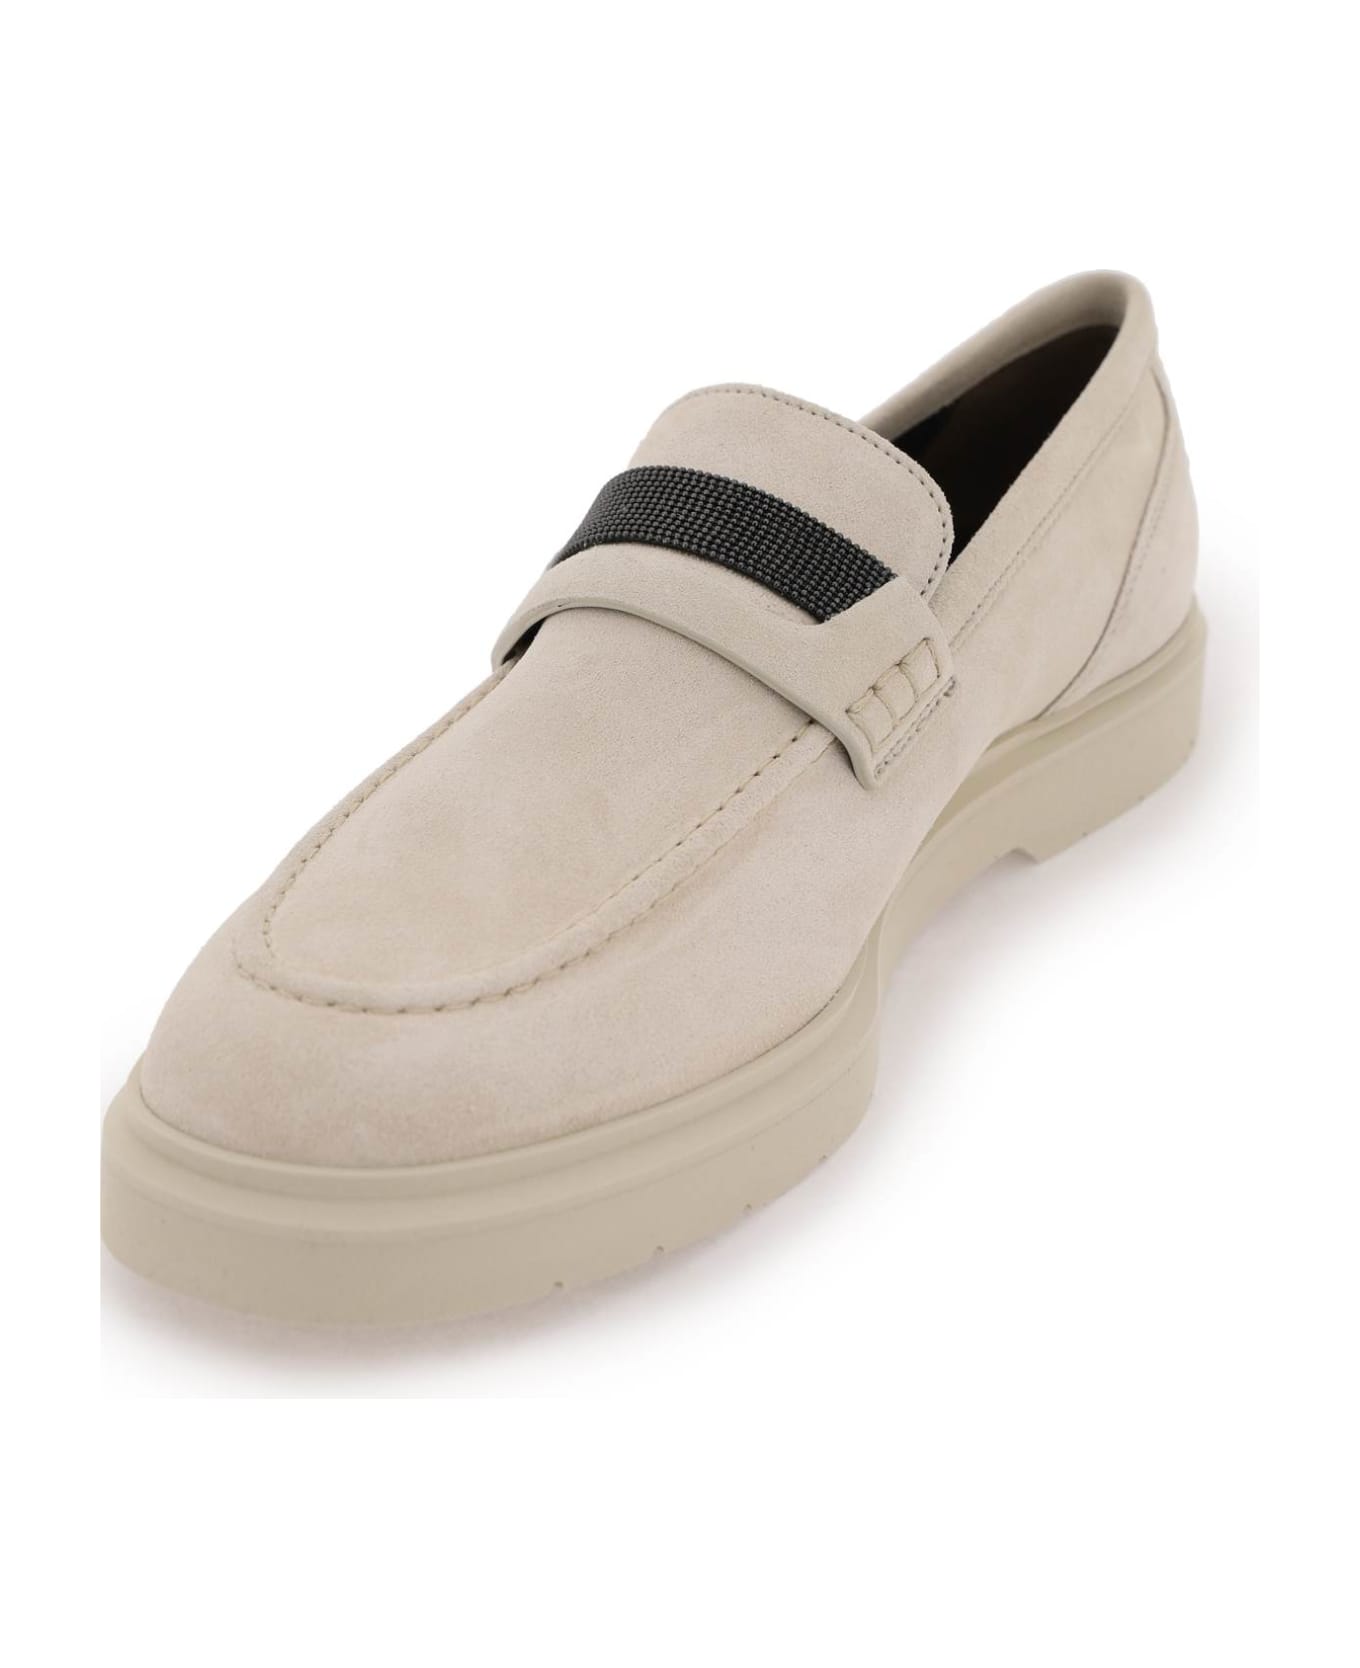 Brunello Cucinelli Suede Penny Loafer With Jewellery - Beige